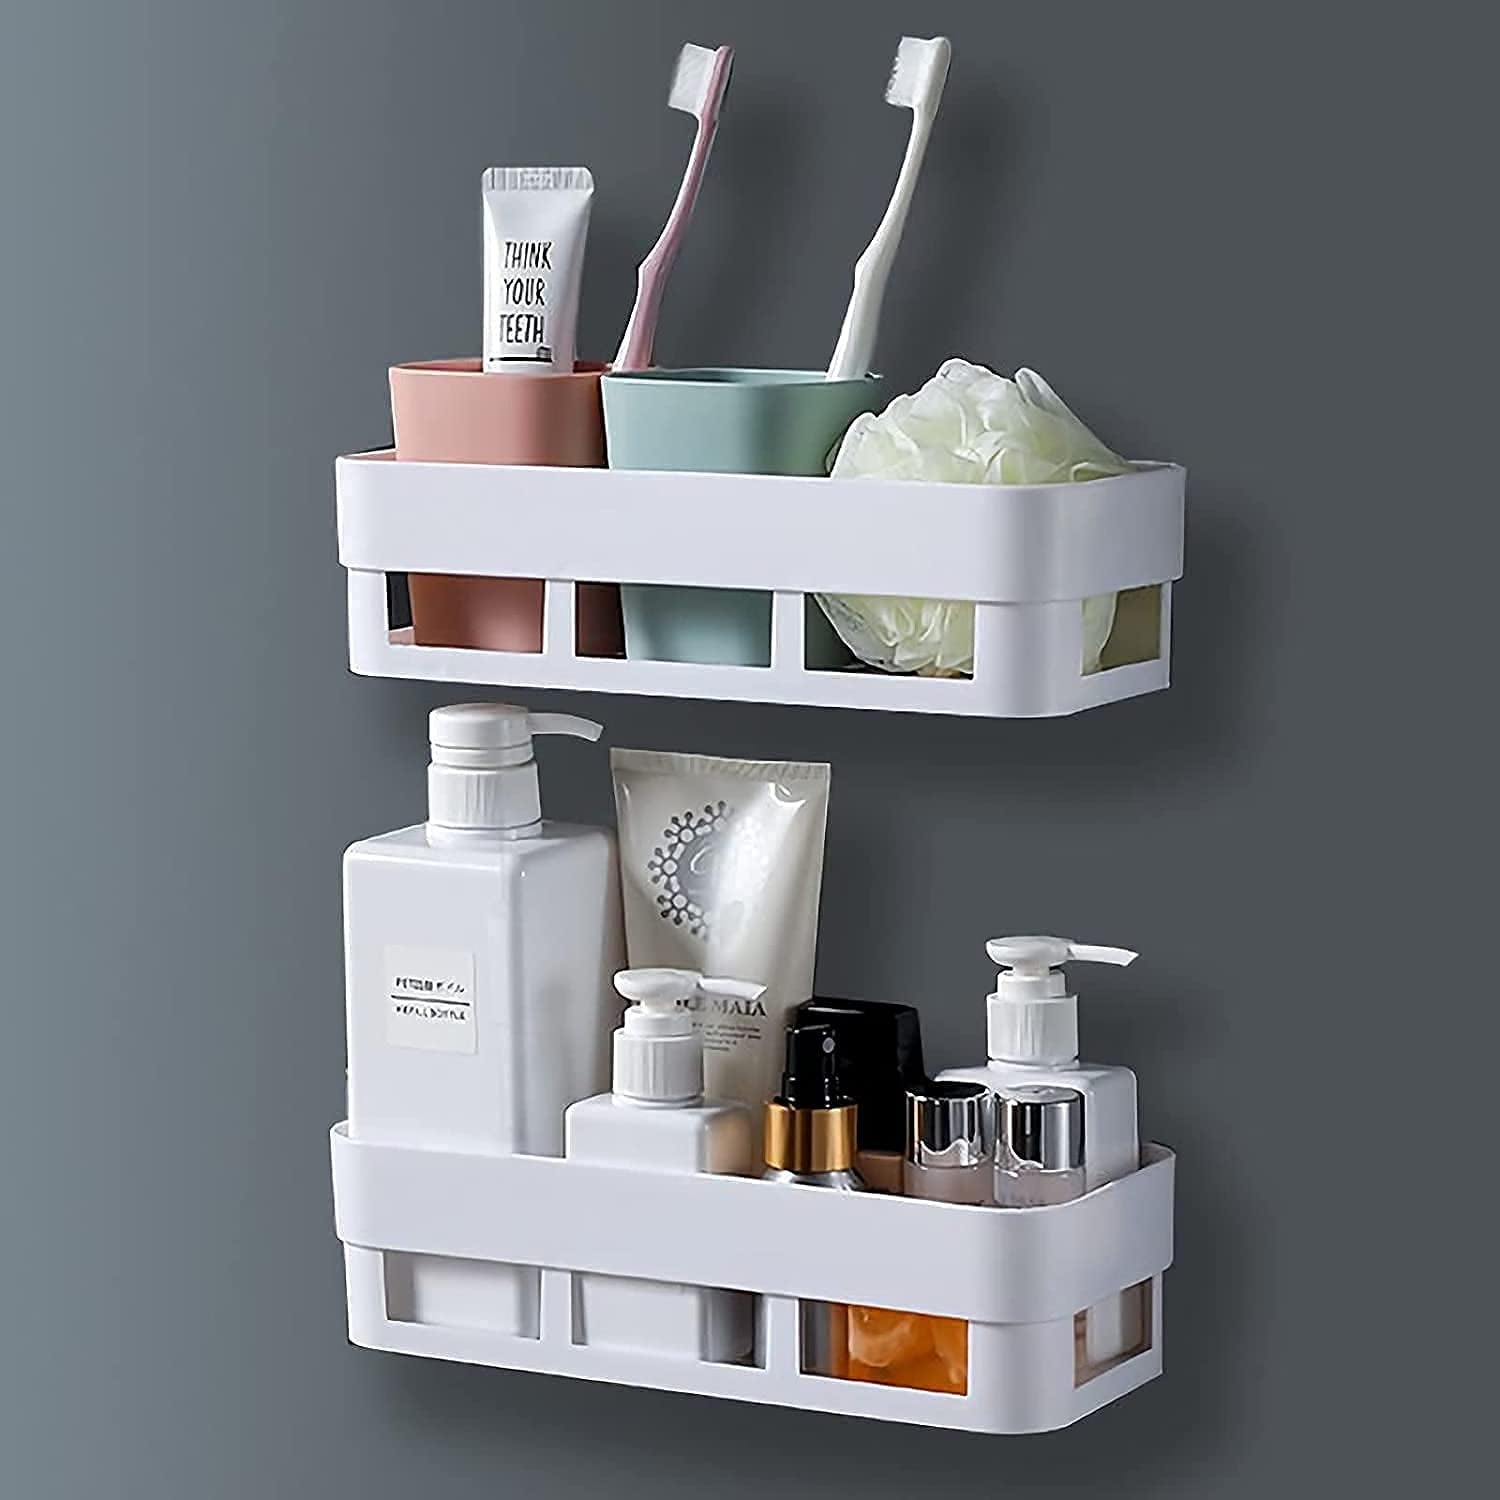 4029 ABS Plastic Shower Corner Caddy Basket Shelf Rack with Wall Mounted Suction Cup for Bathroom Kitchen DeoDap